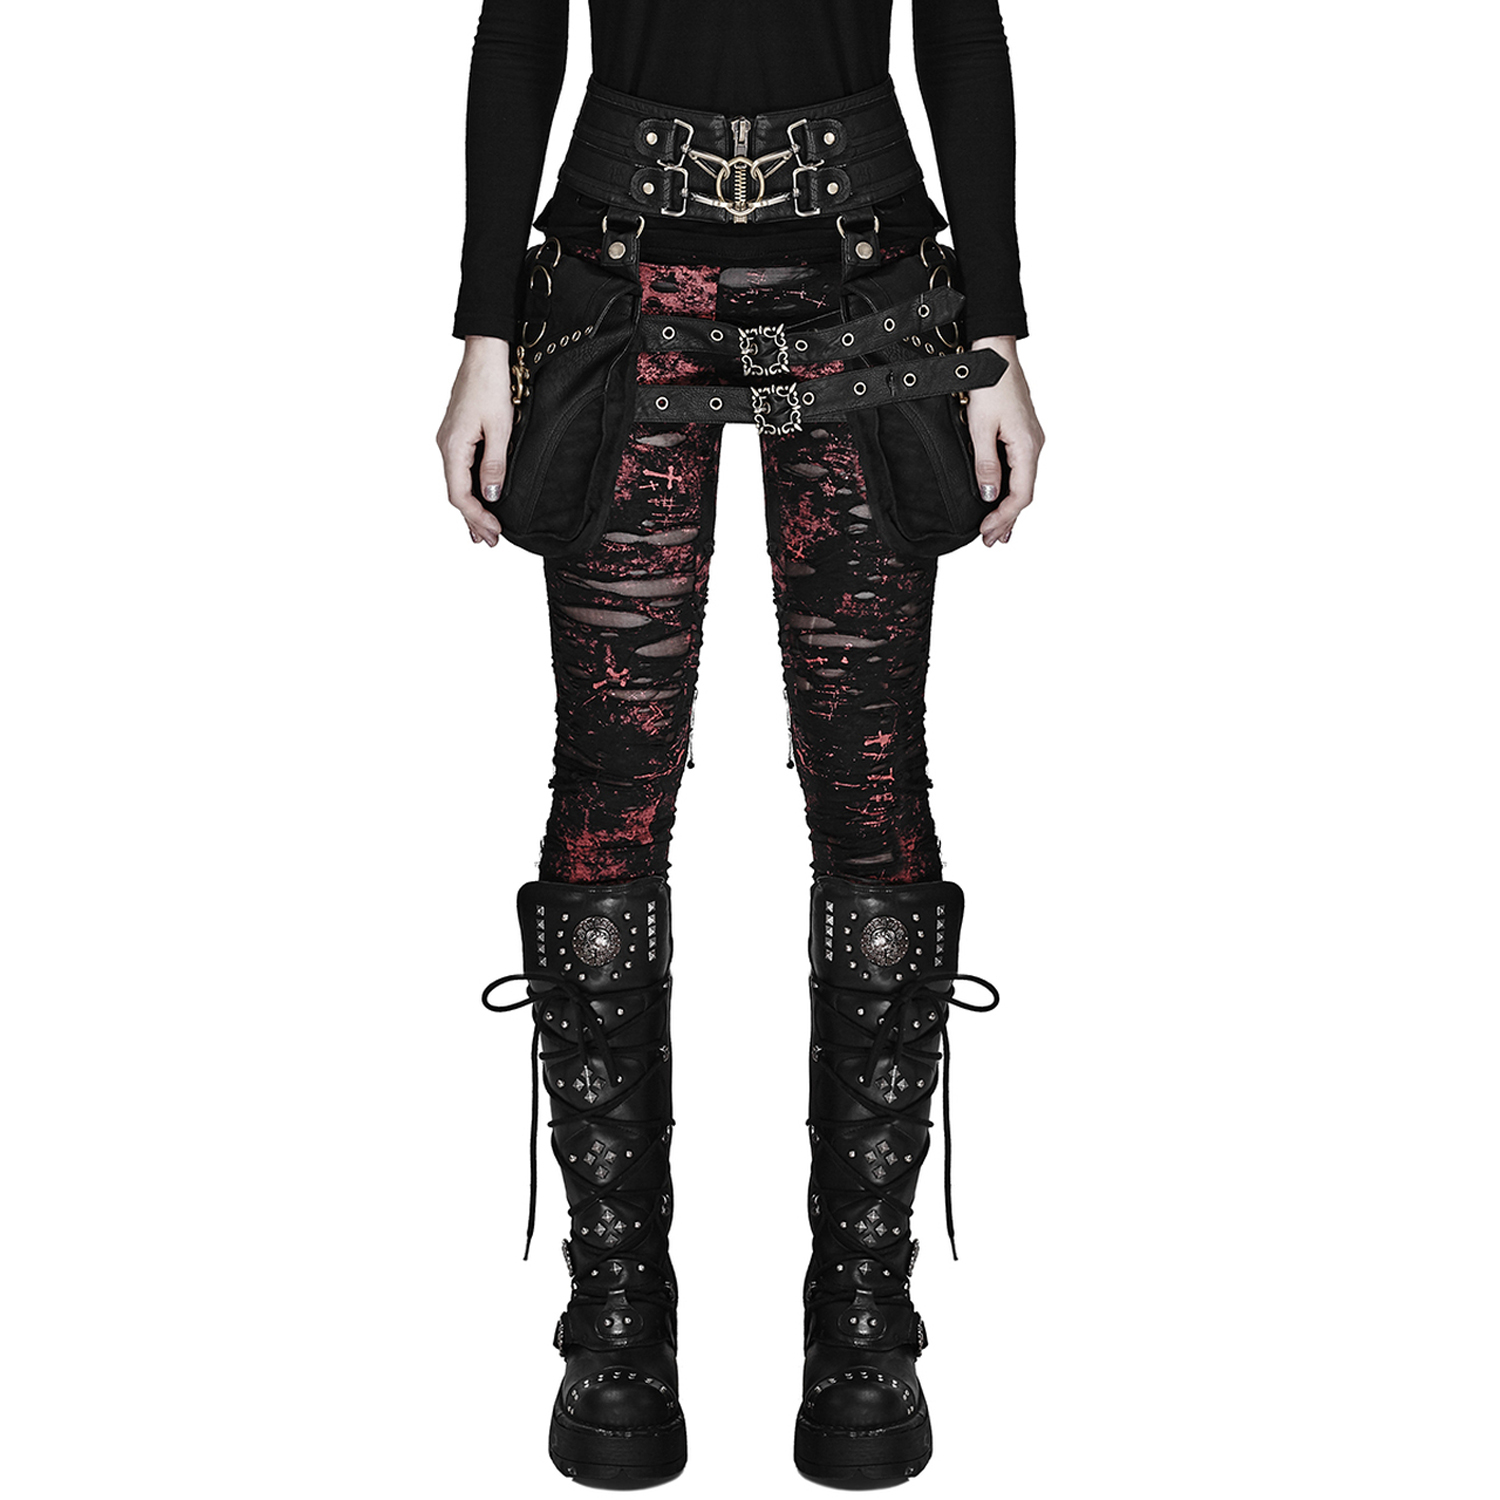 Punk Rave Women's Waistband With Adjustment Buckle Punk Accessories Slim  Girdle